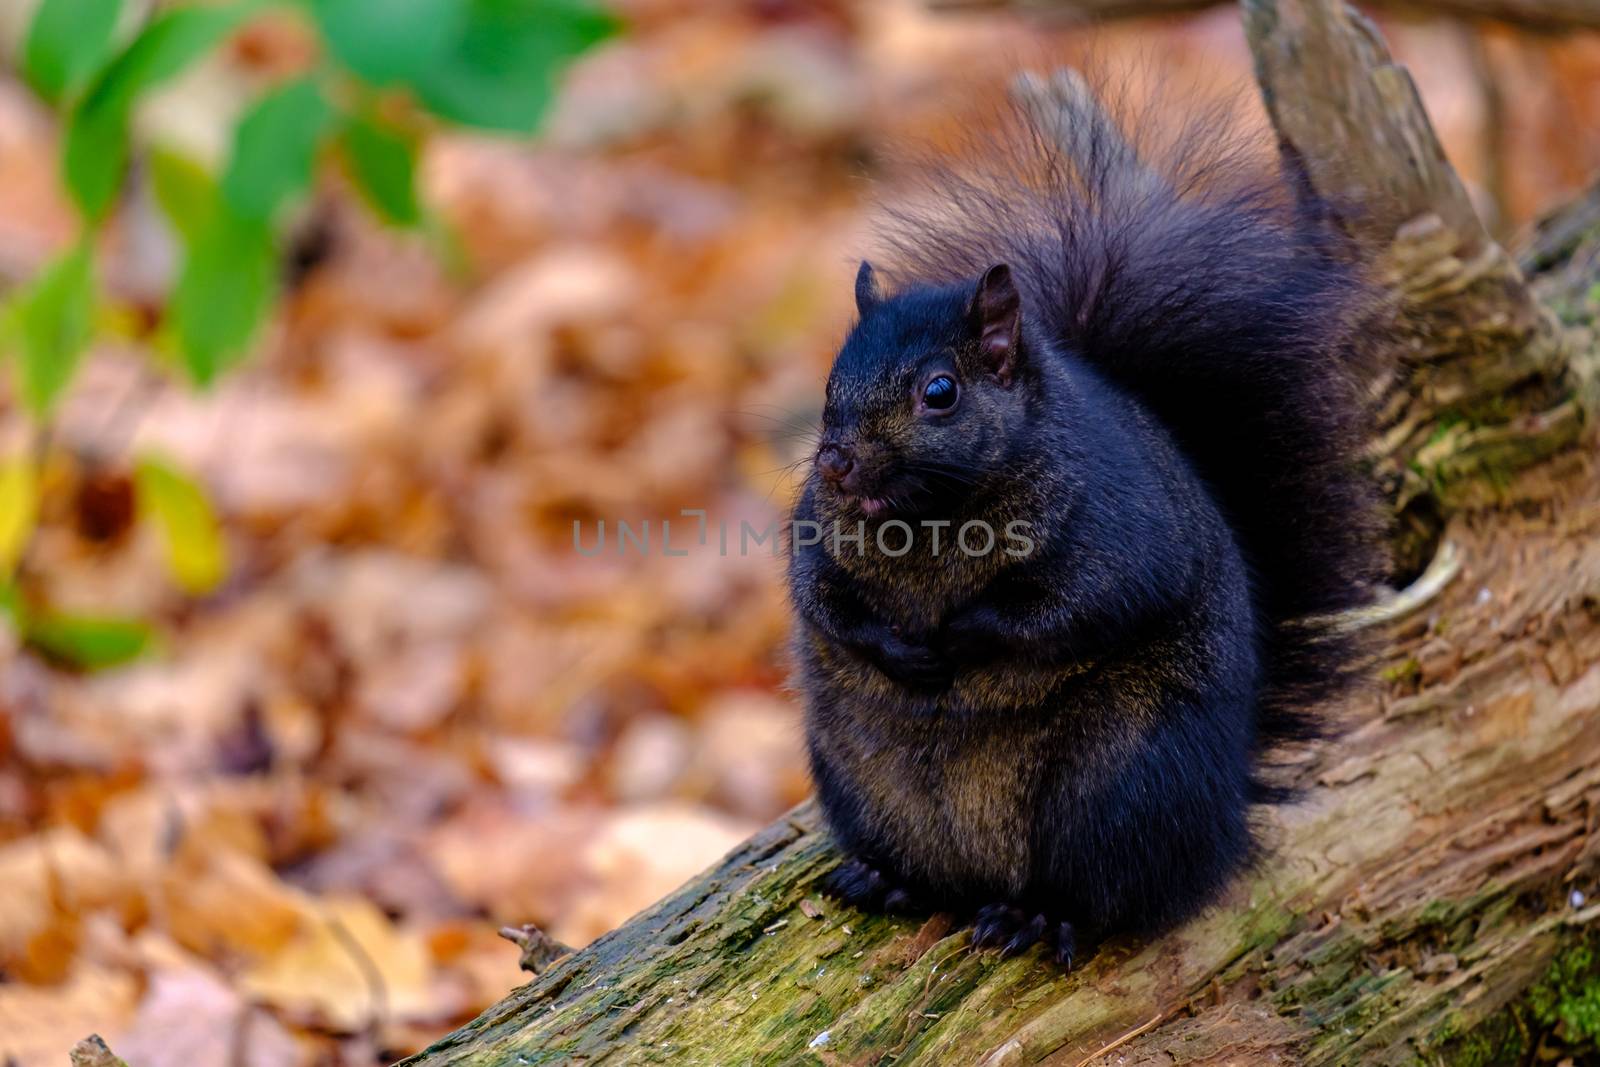 Chubby black squirrel sits on a log by colintemple